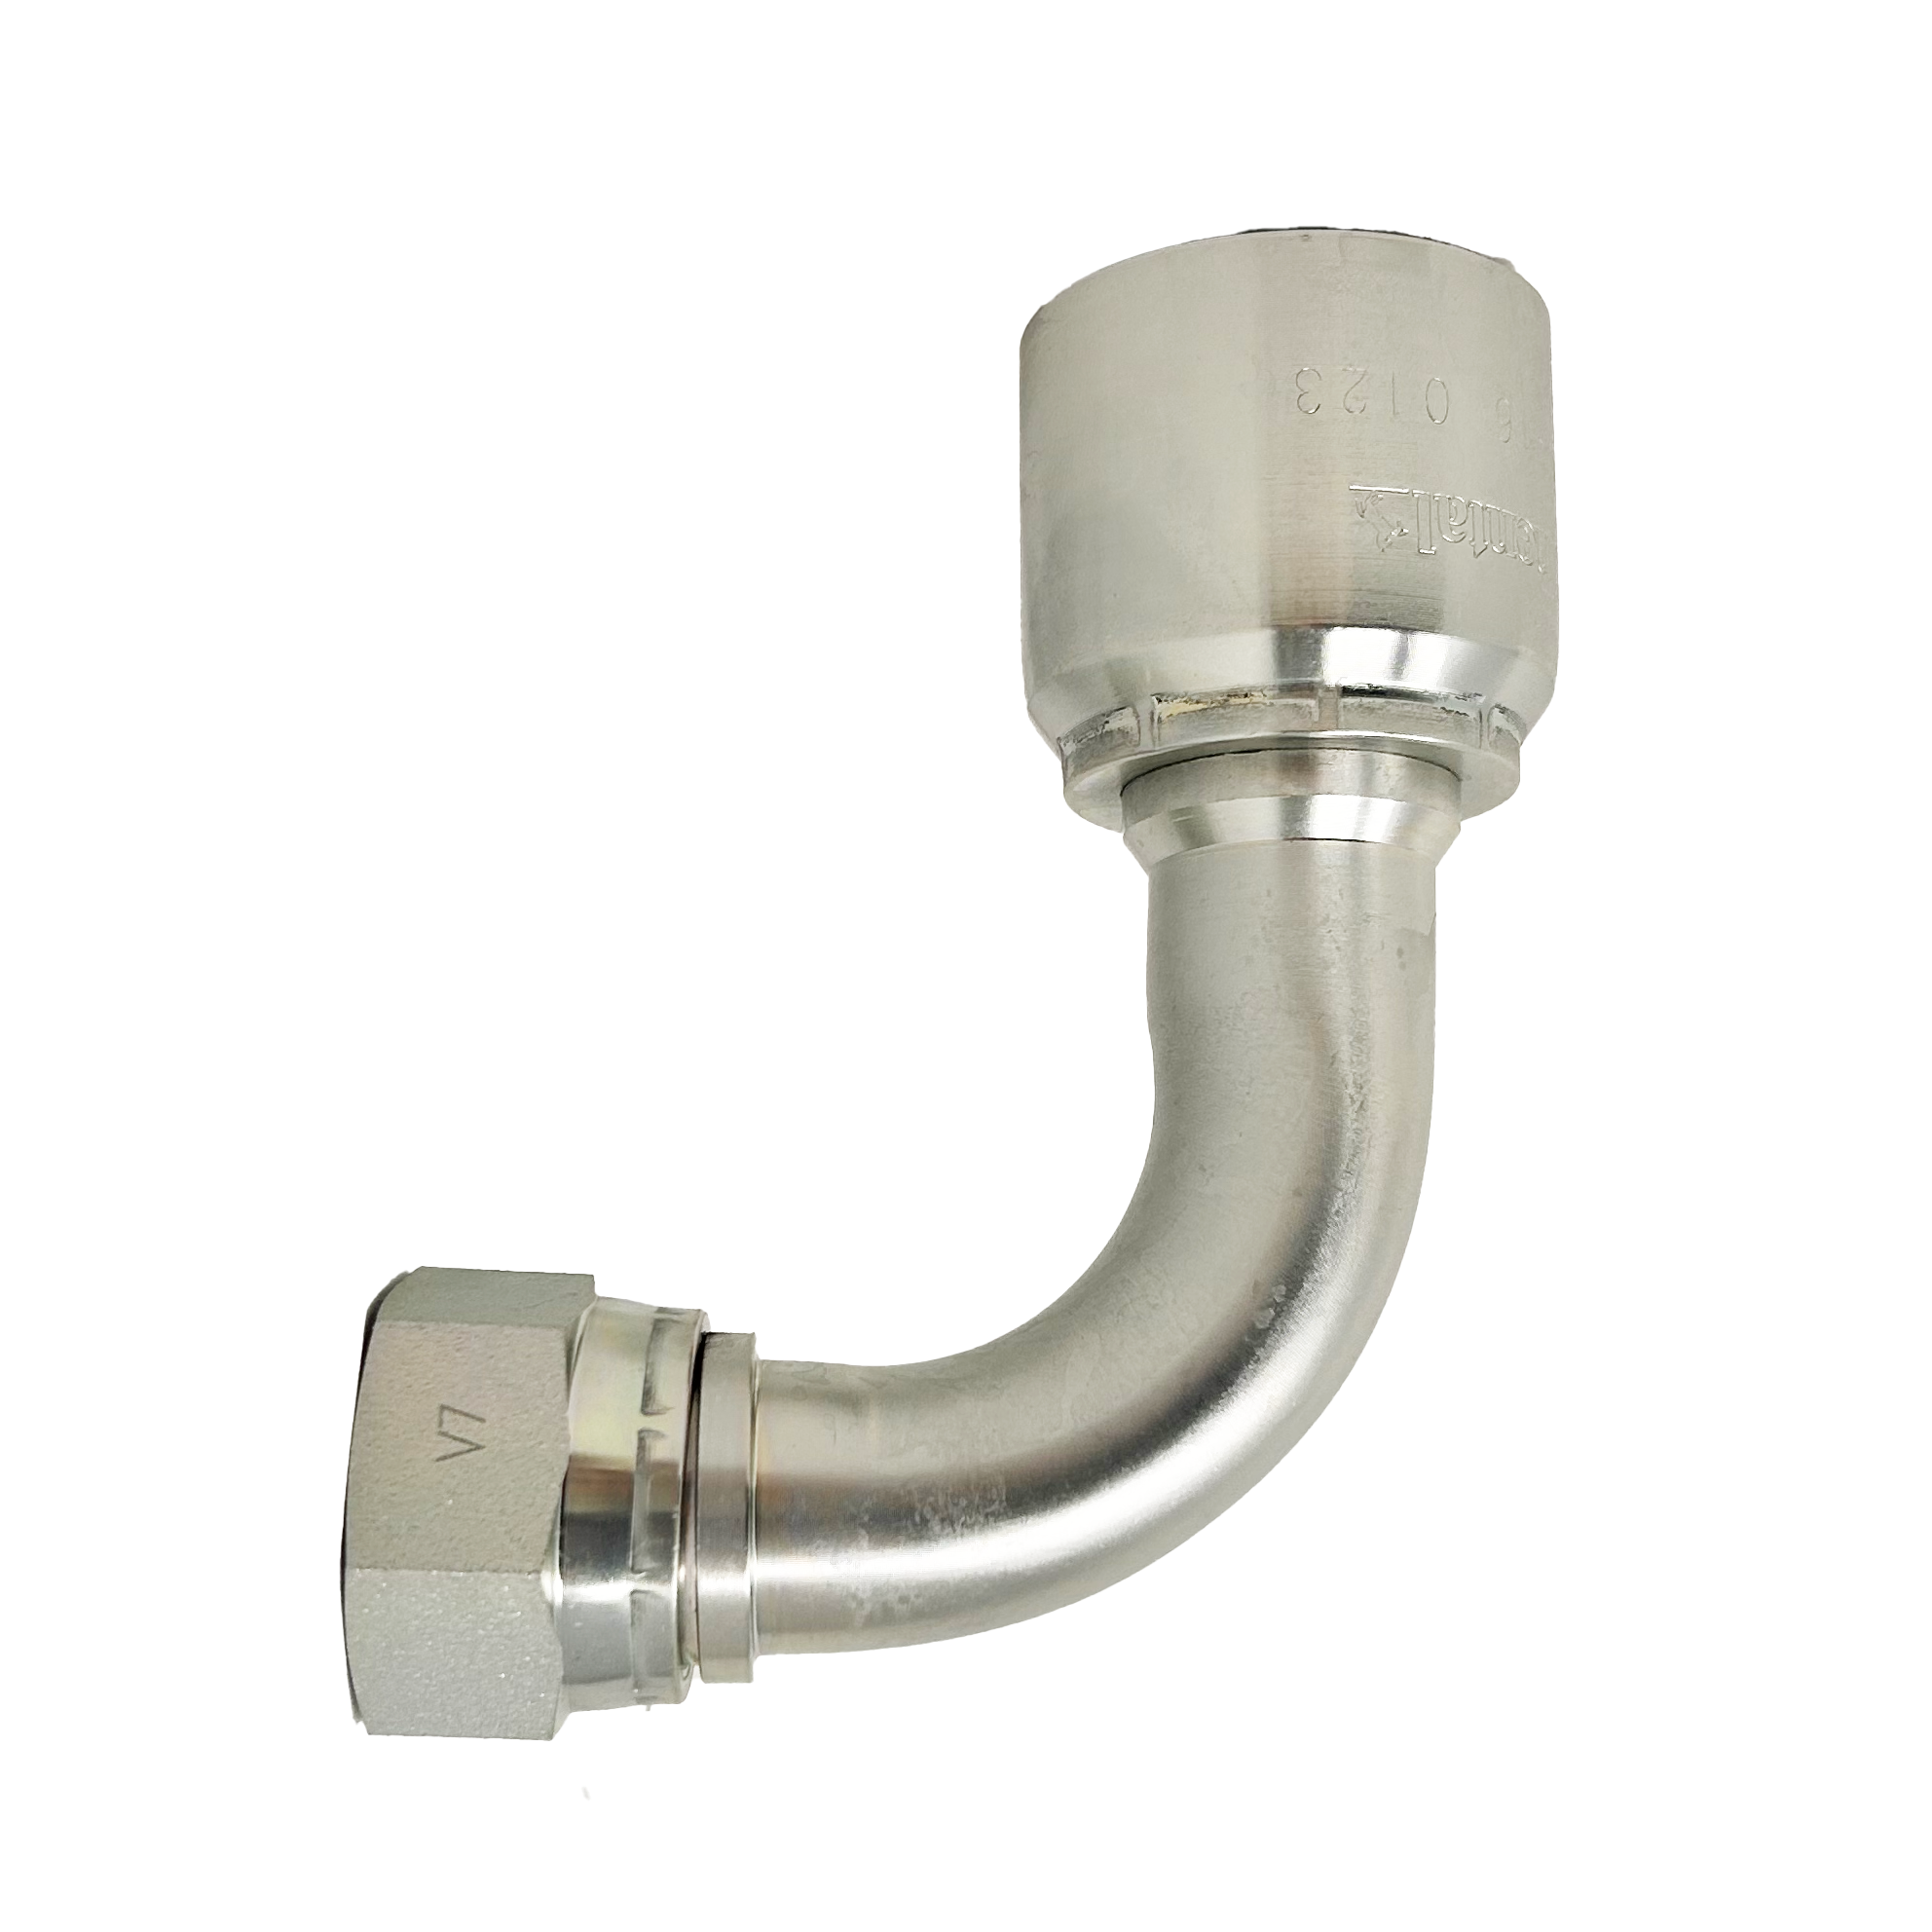 B2-JCFX90-0506: Continental Hose Fitting, 0.3125 (5/16") Hose ID x 9/16-18 Female JIC, 90-Degree Swivel Connection